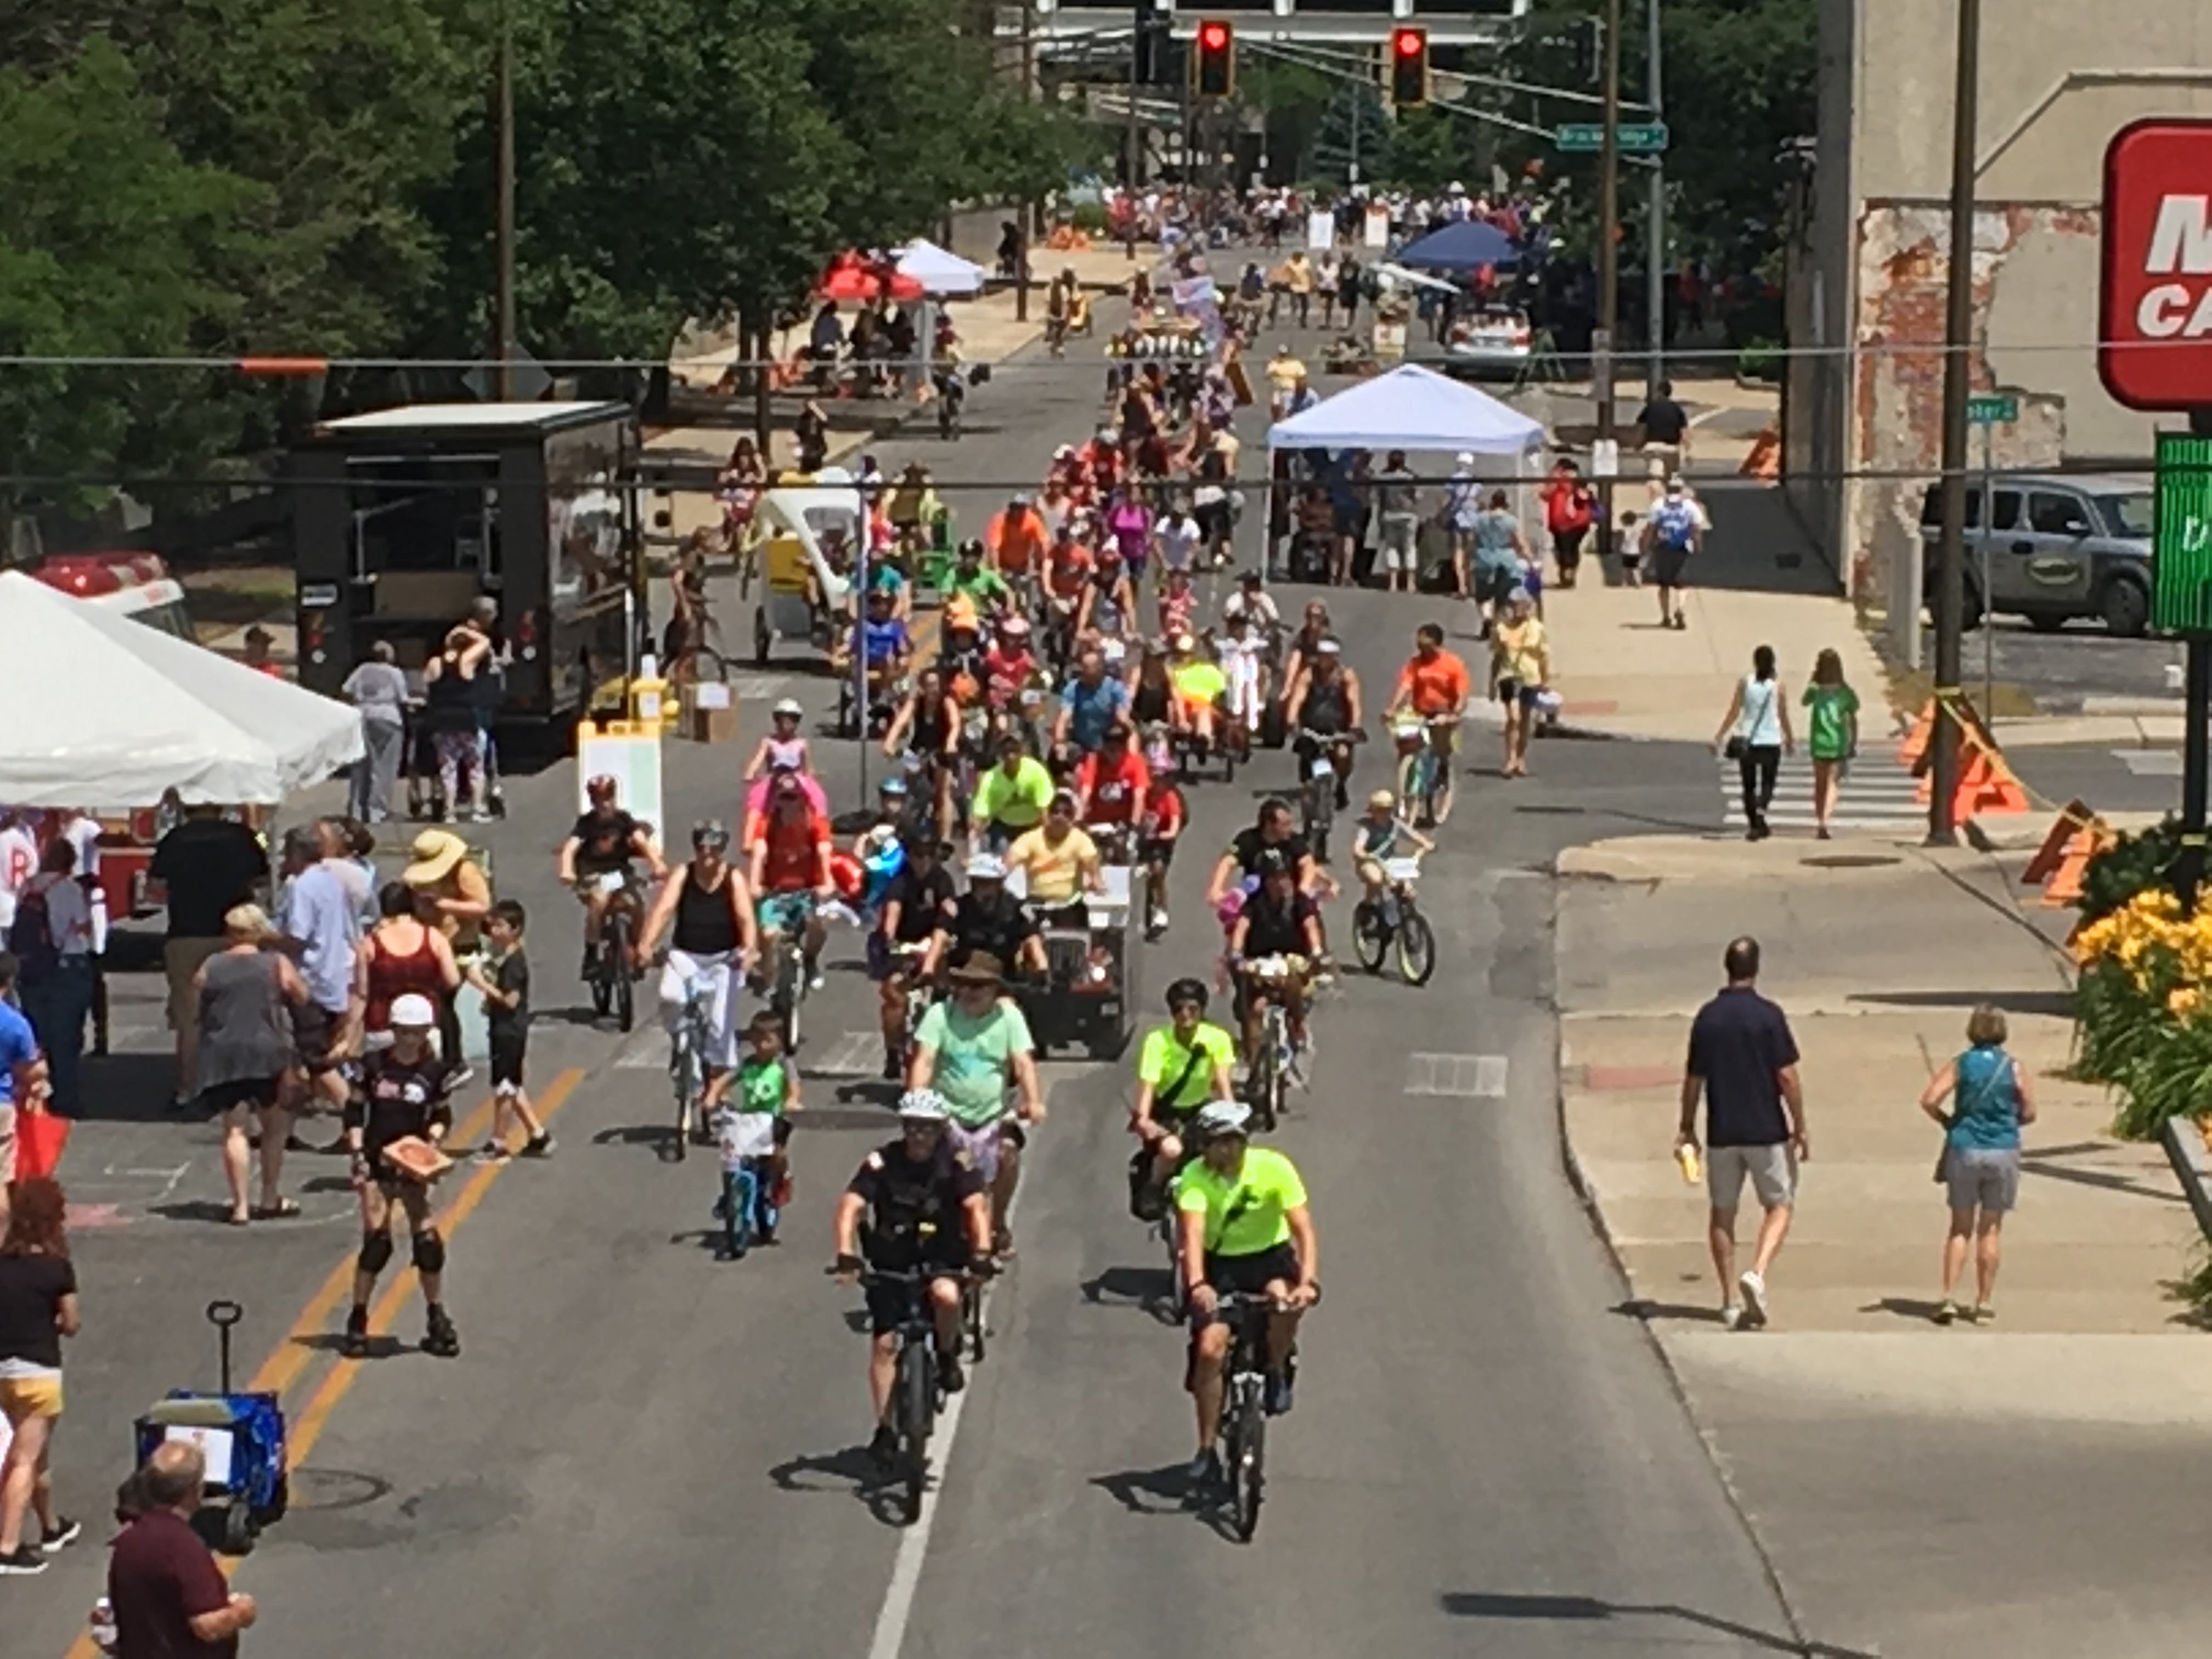 A group of bicyclists rides down the Open Streets route.